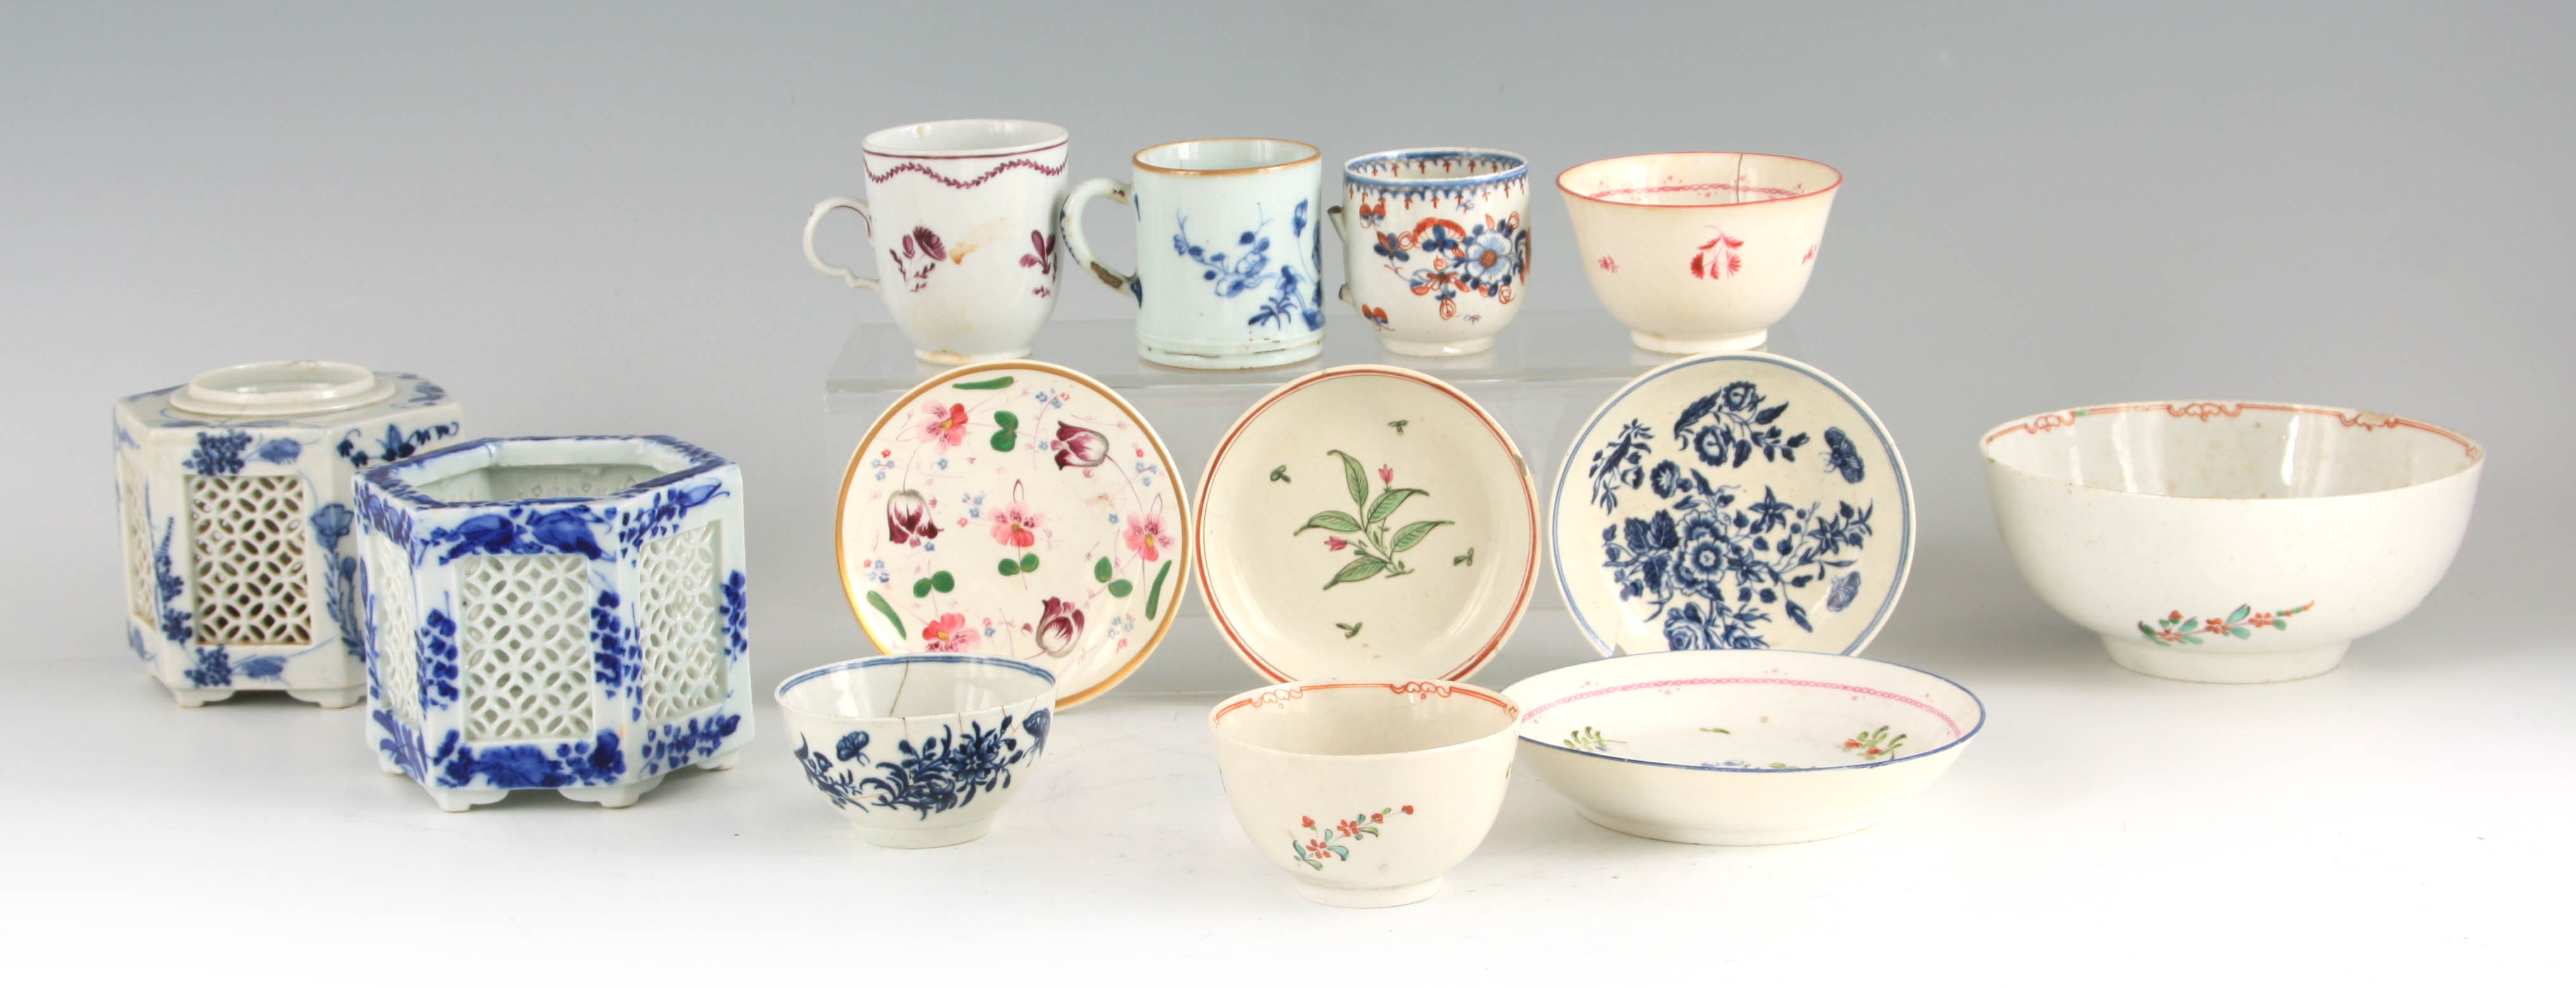 A SELECTION OF 18TH CENTURY ENGLISH AND ORIENTAL PORCELAIN including a Liverpool Bowl 15cm